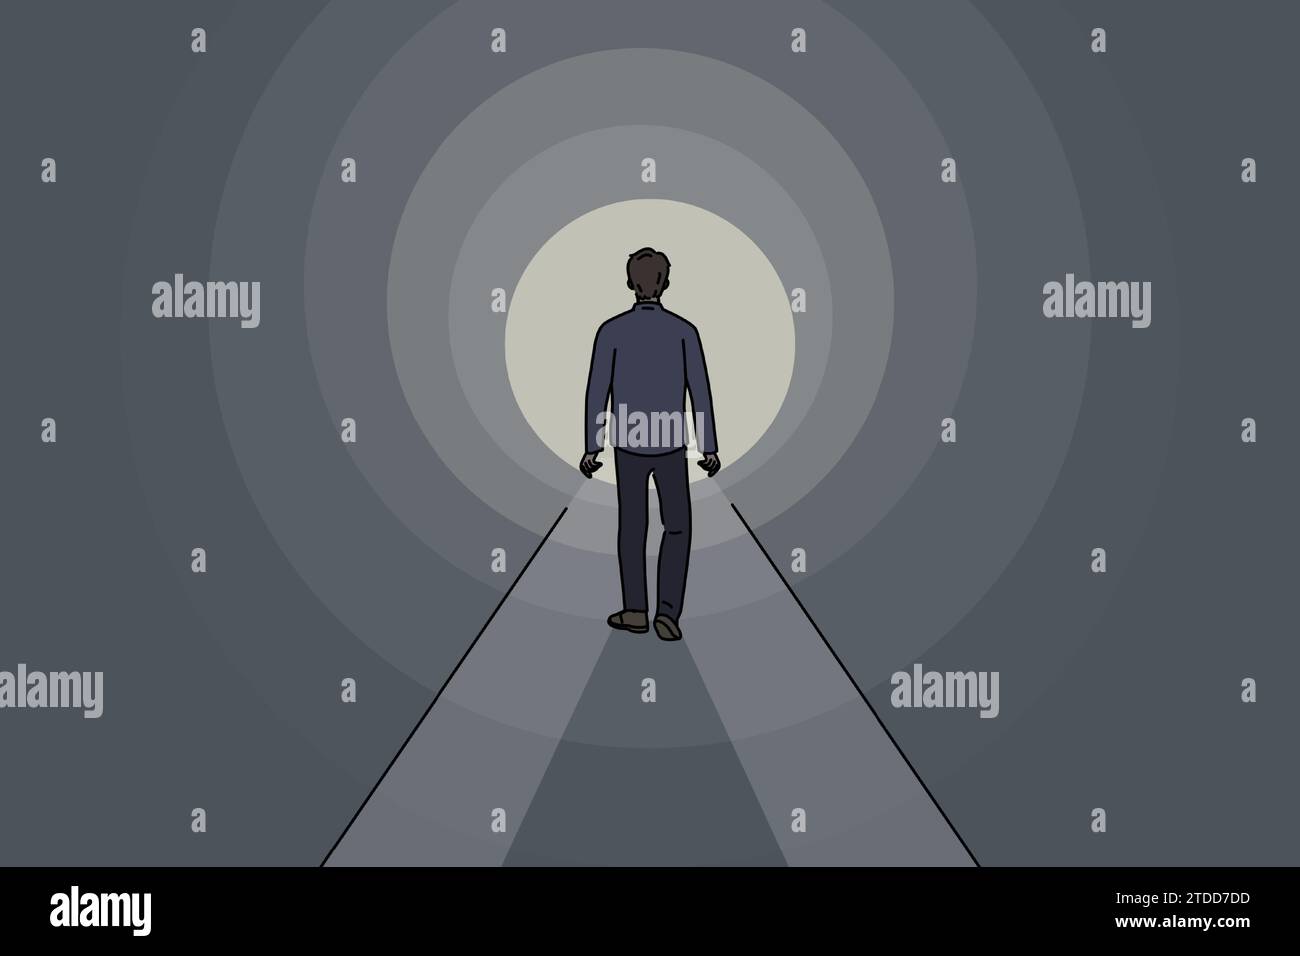 Man walks through dark tunnel towards exit, striving to achieve success and get out of problematic situation. Lonely guy sees light at end of tunnel, walking along mysterious path. Stock Vector